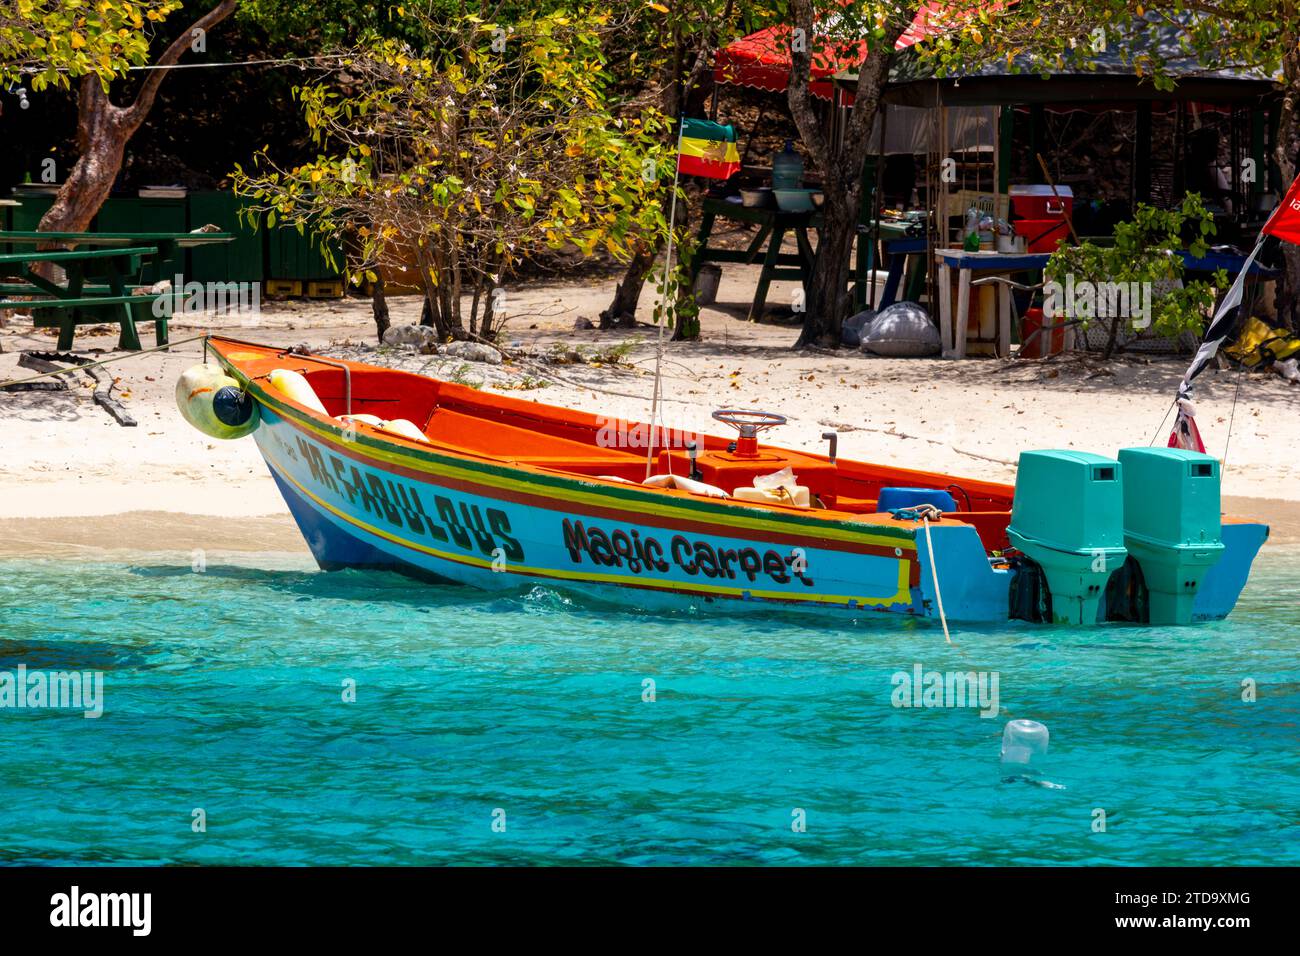 Mr Fabulous – Magic Carpet Water Taxi, Island Beach of Petit Rameau, With Picnic Tables, Tobago Cays Marine Park, The Grenadines, Eastern Caribbean. Stock Photo